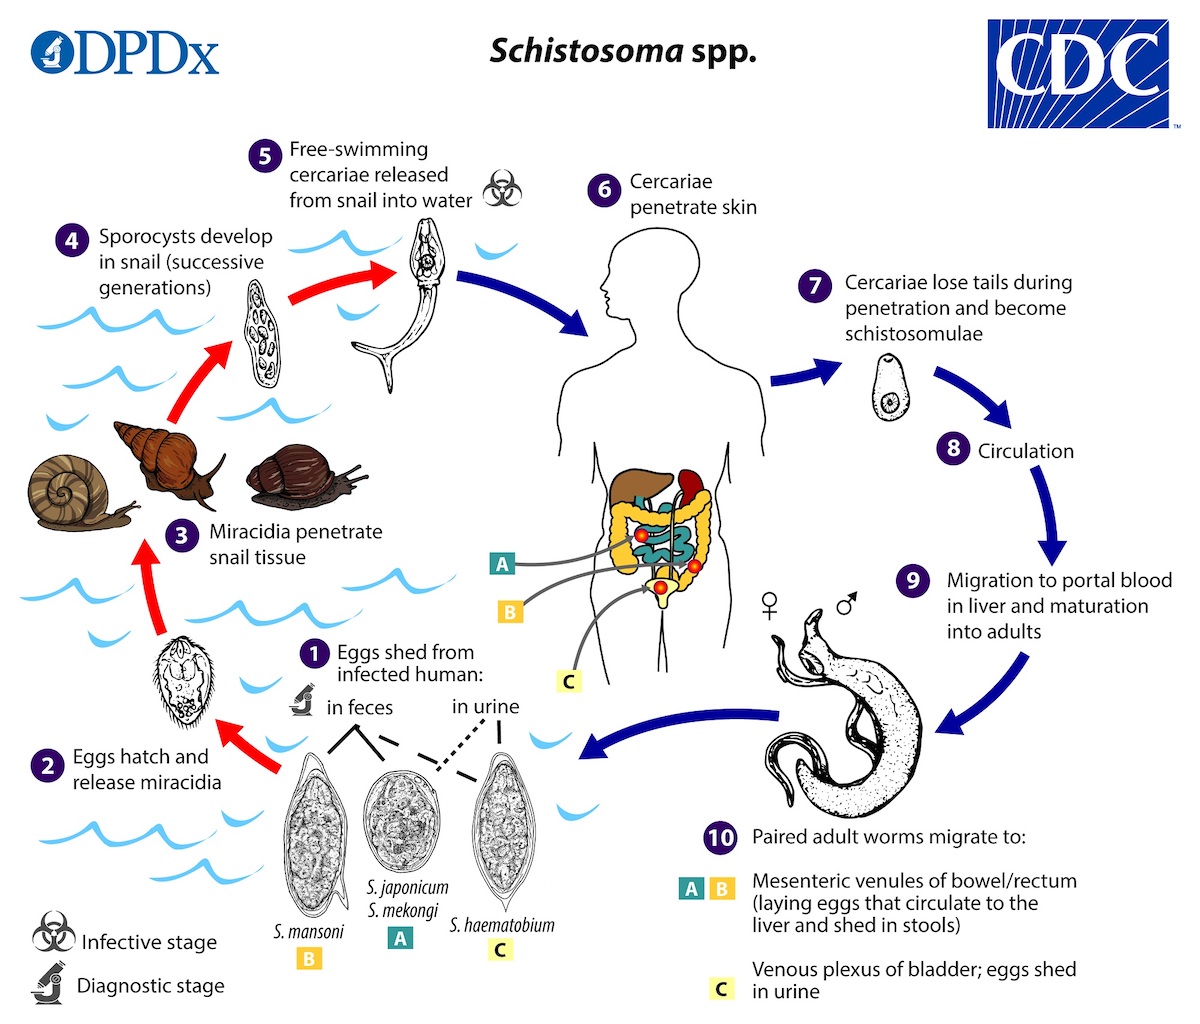 A detailed view of the transmission cycle of schistosomiasis